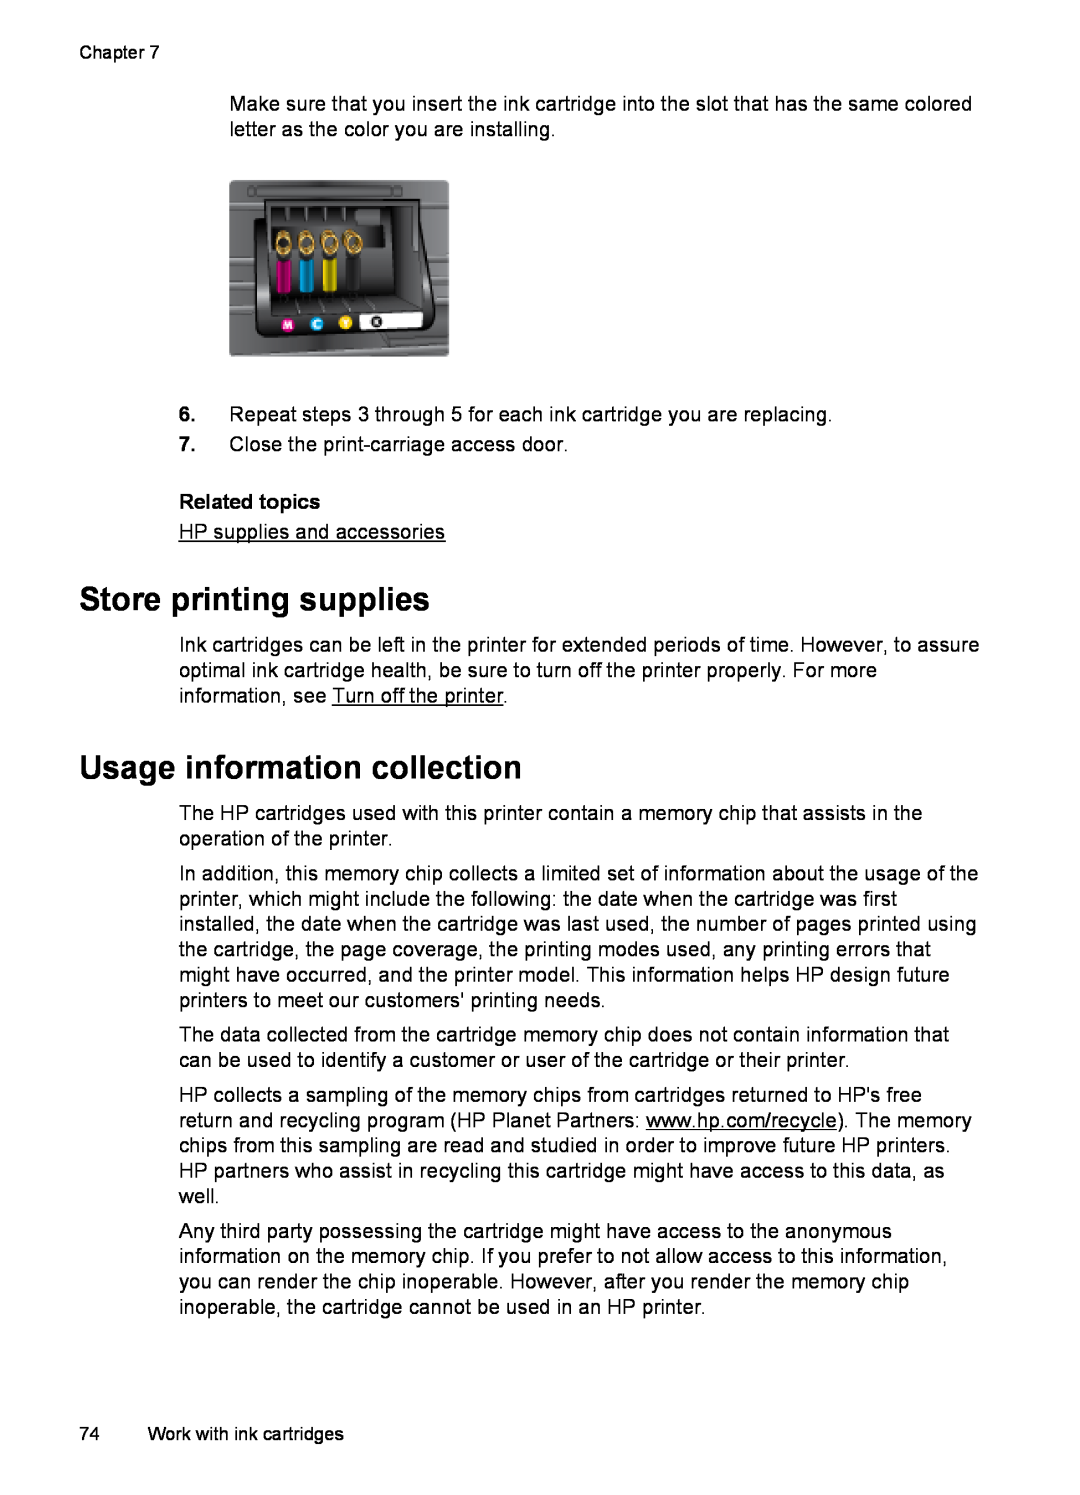 HP 6600 - H7 manual Store printing supplies, Usage information collection, Related topics 